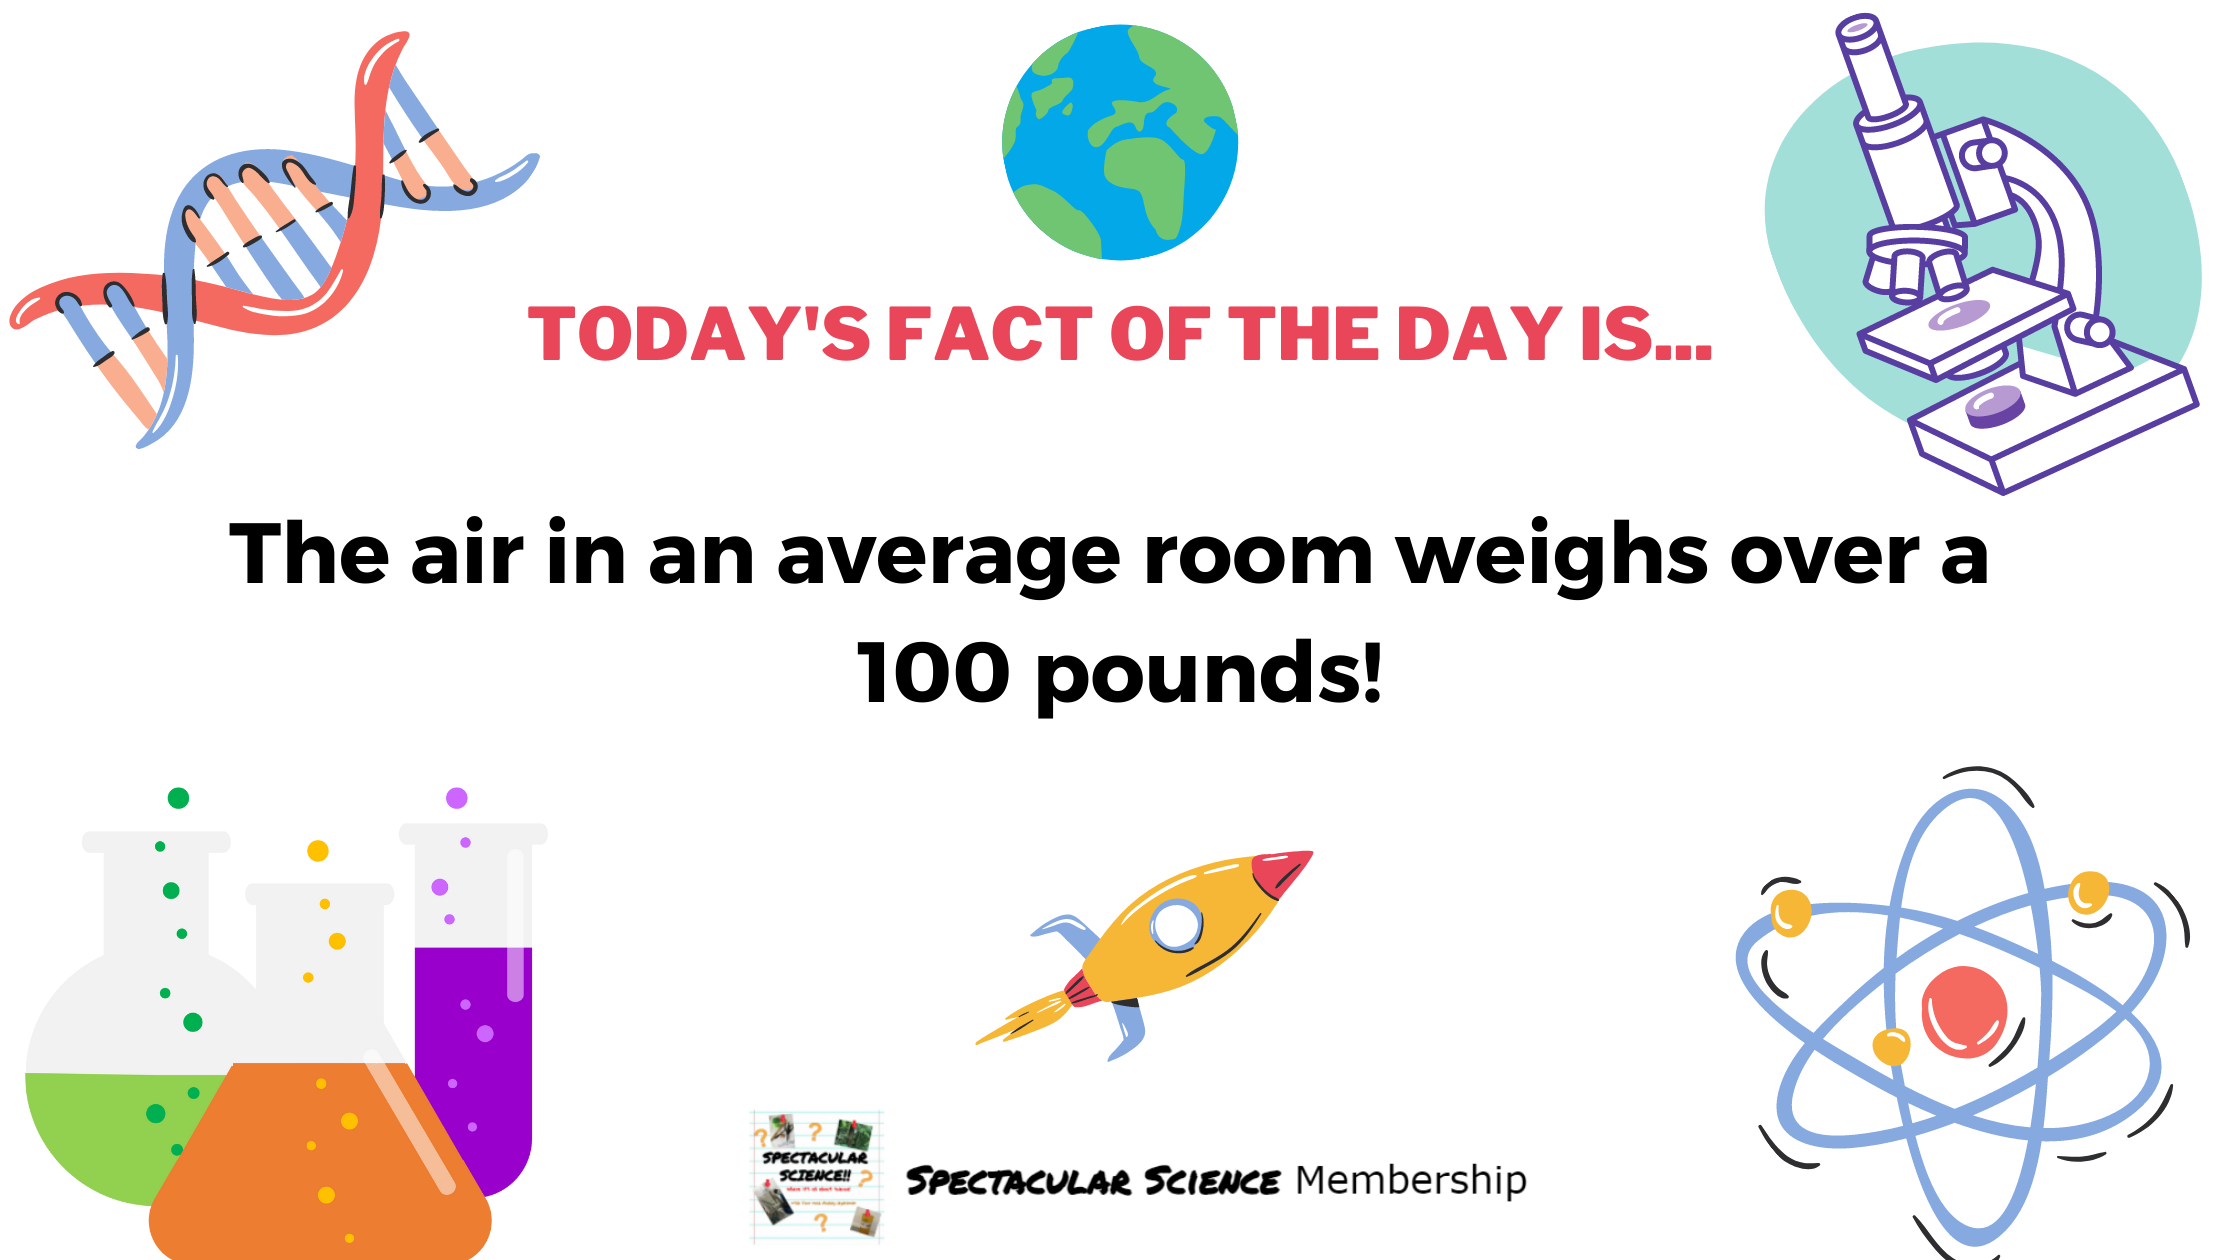 Fact of the Day Image Dec. 21st